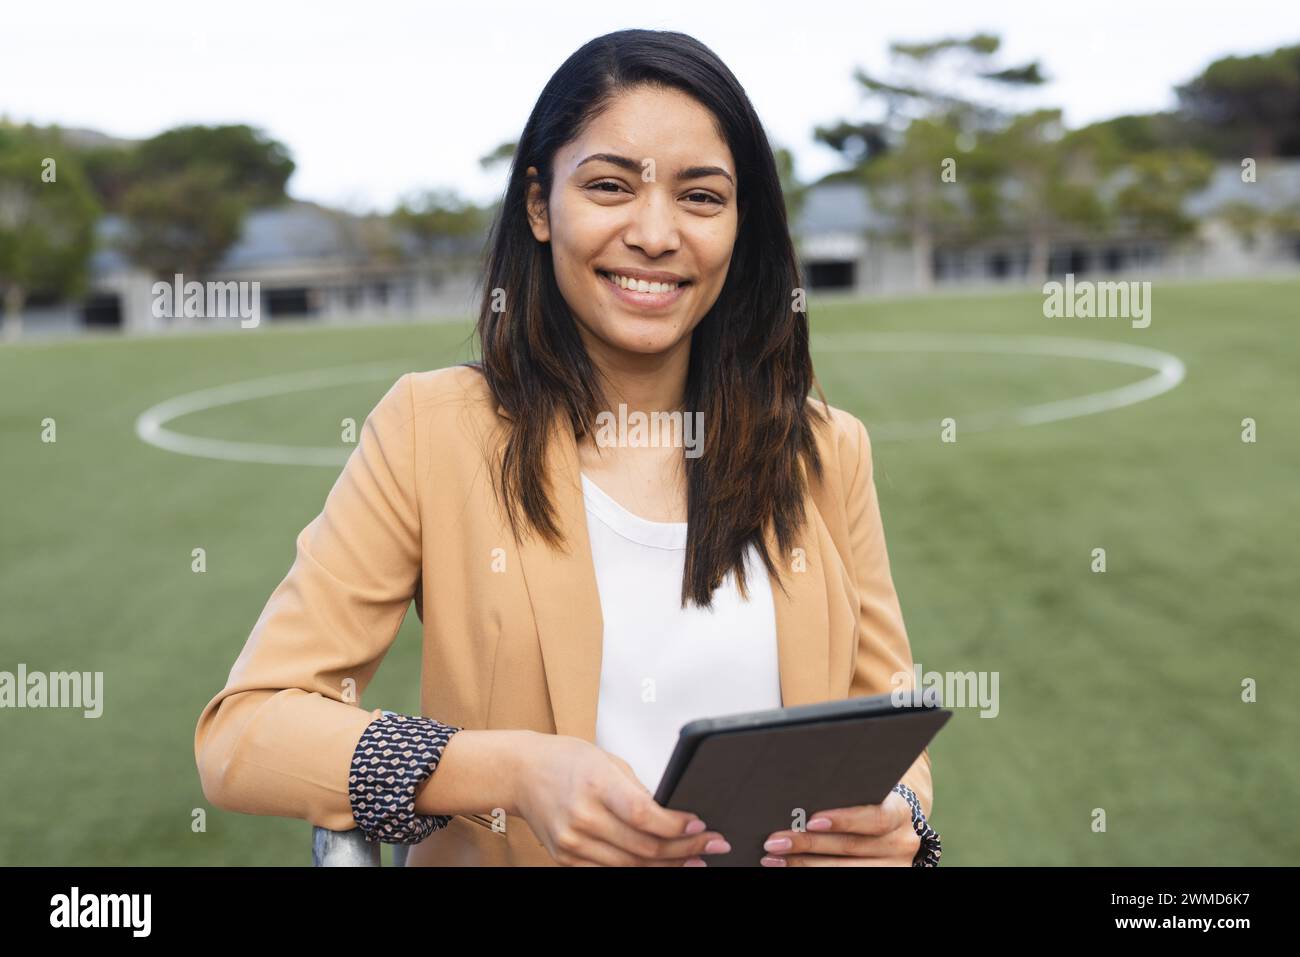 Young biracial teacher smiles holding a tablet on a sports field Stock Photo